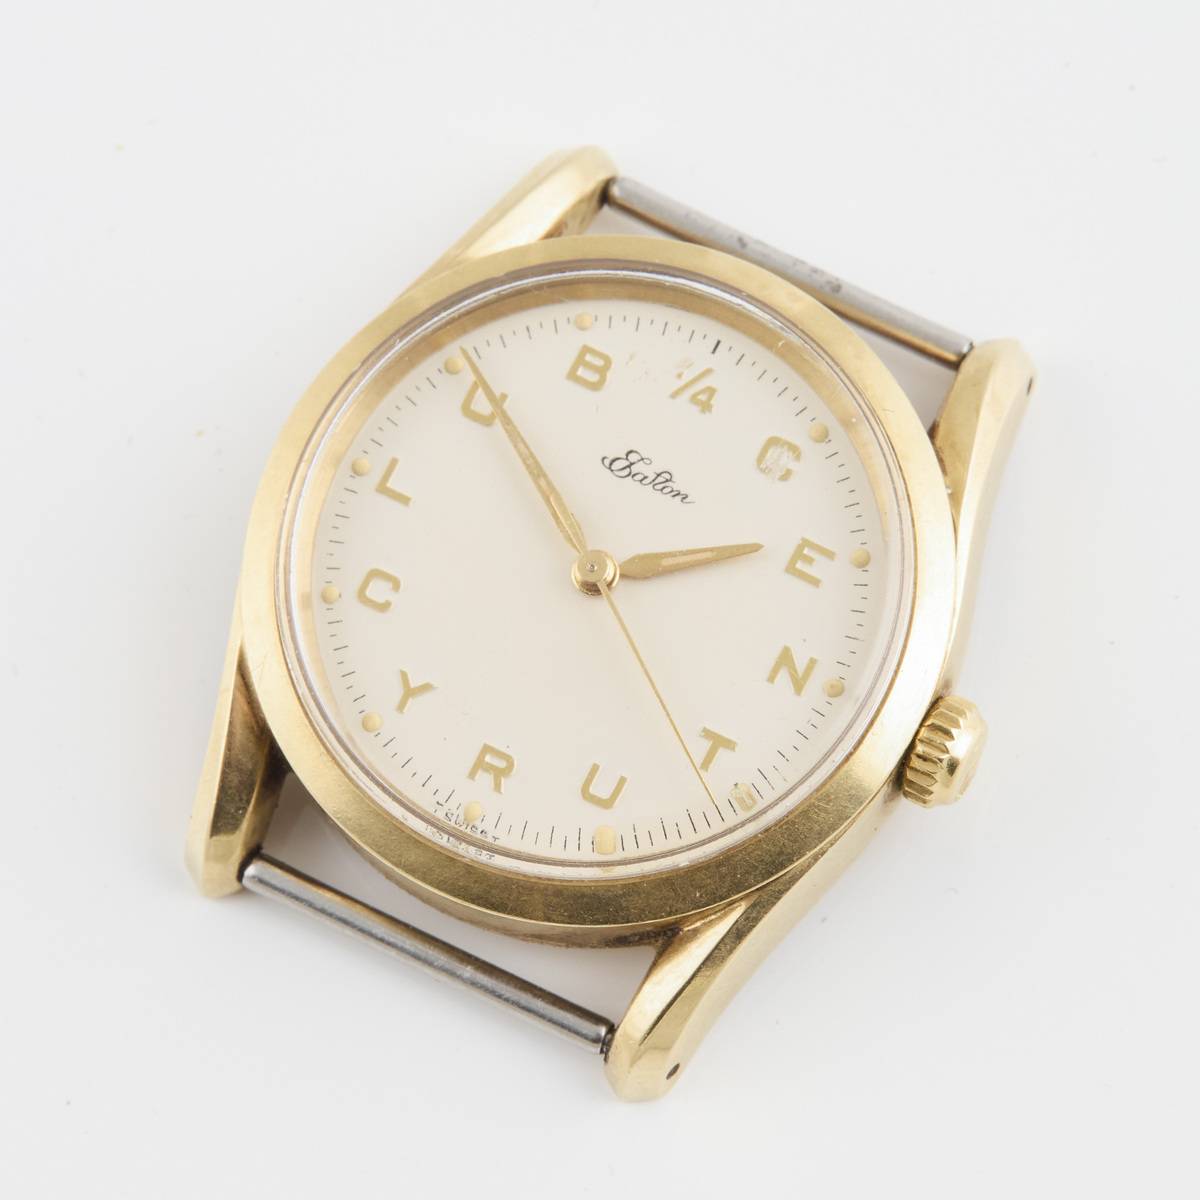 Rolex '1/4 Century Club' Oyster Perpetual Wristwatch, circa 1965; reference #1011; serial #1301143;